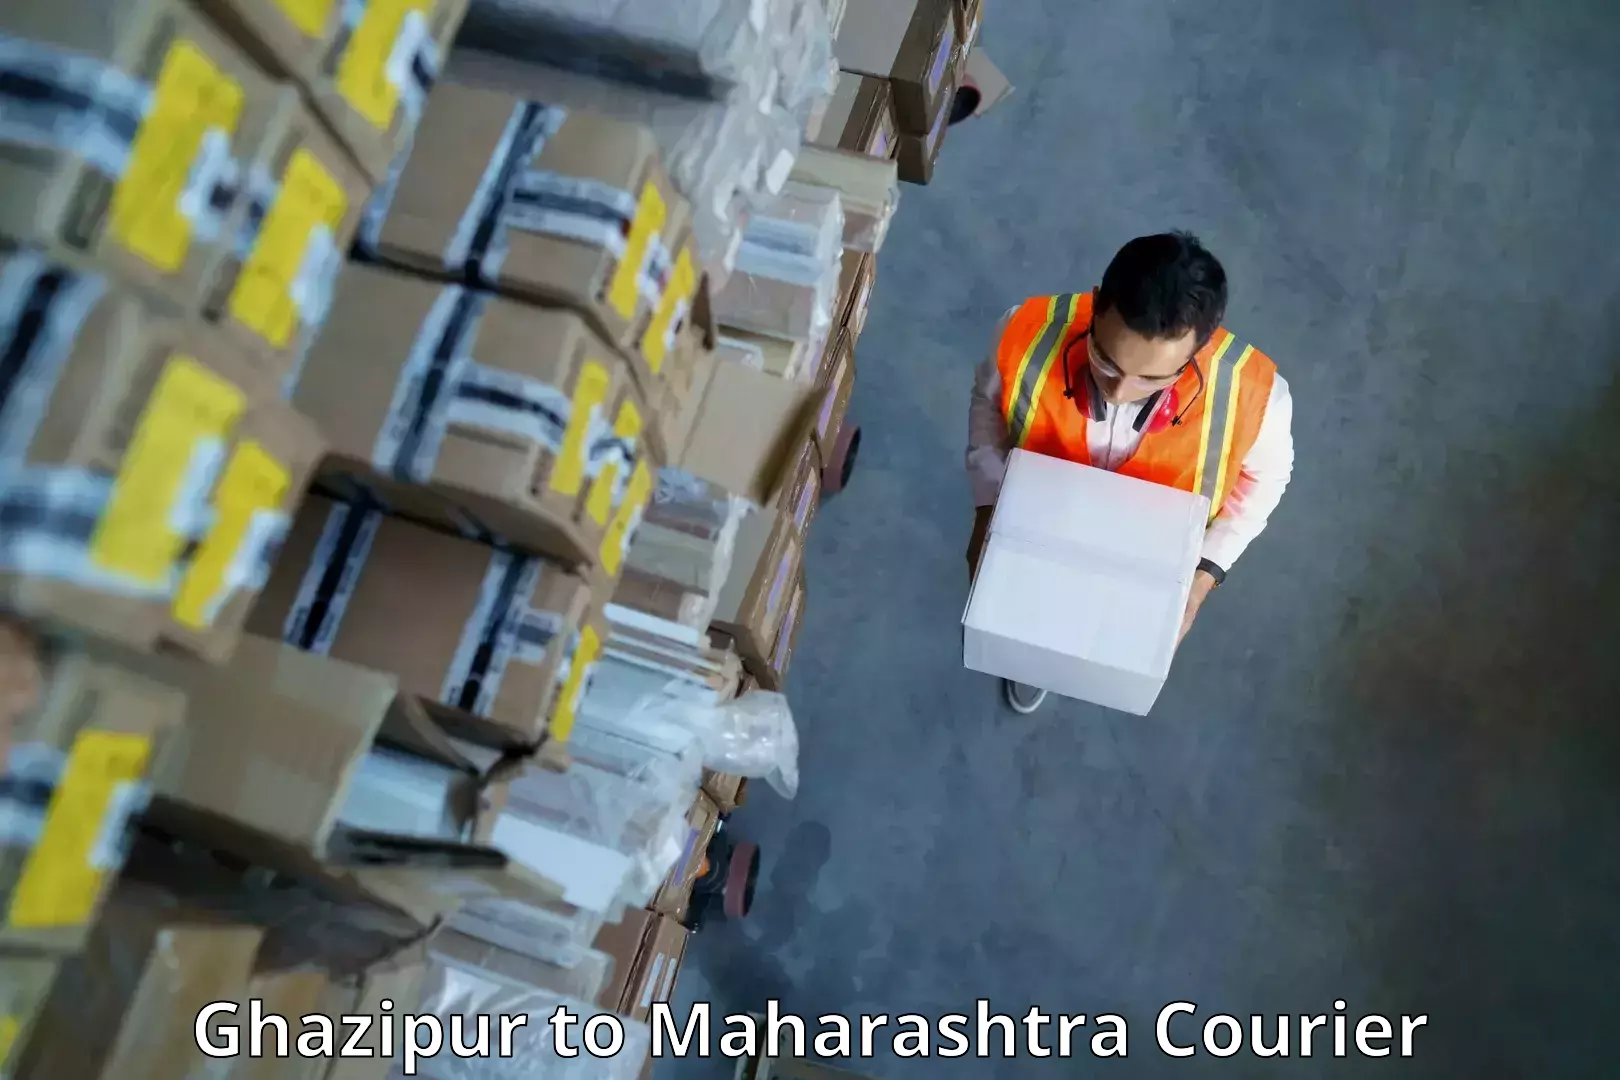 Professional courier handling Ghazipur to Maharashtra